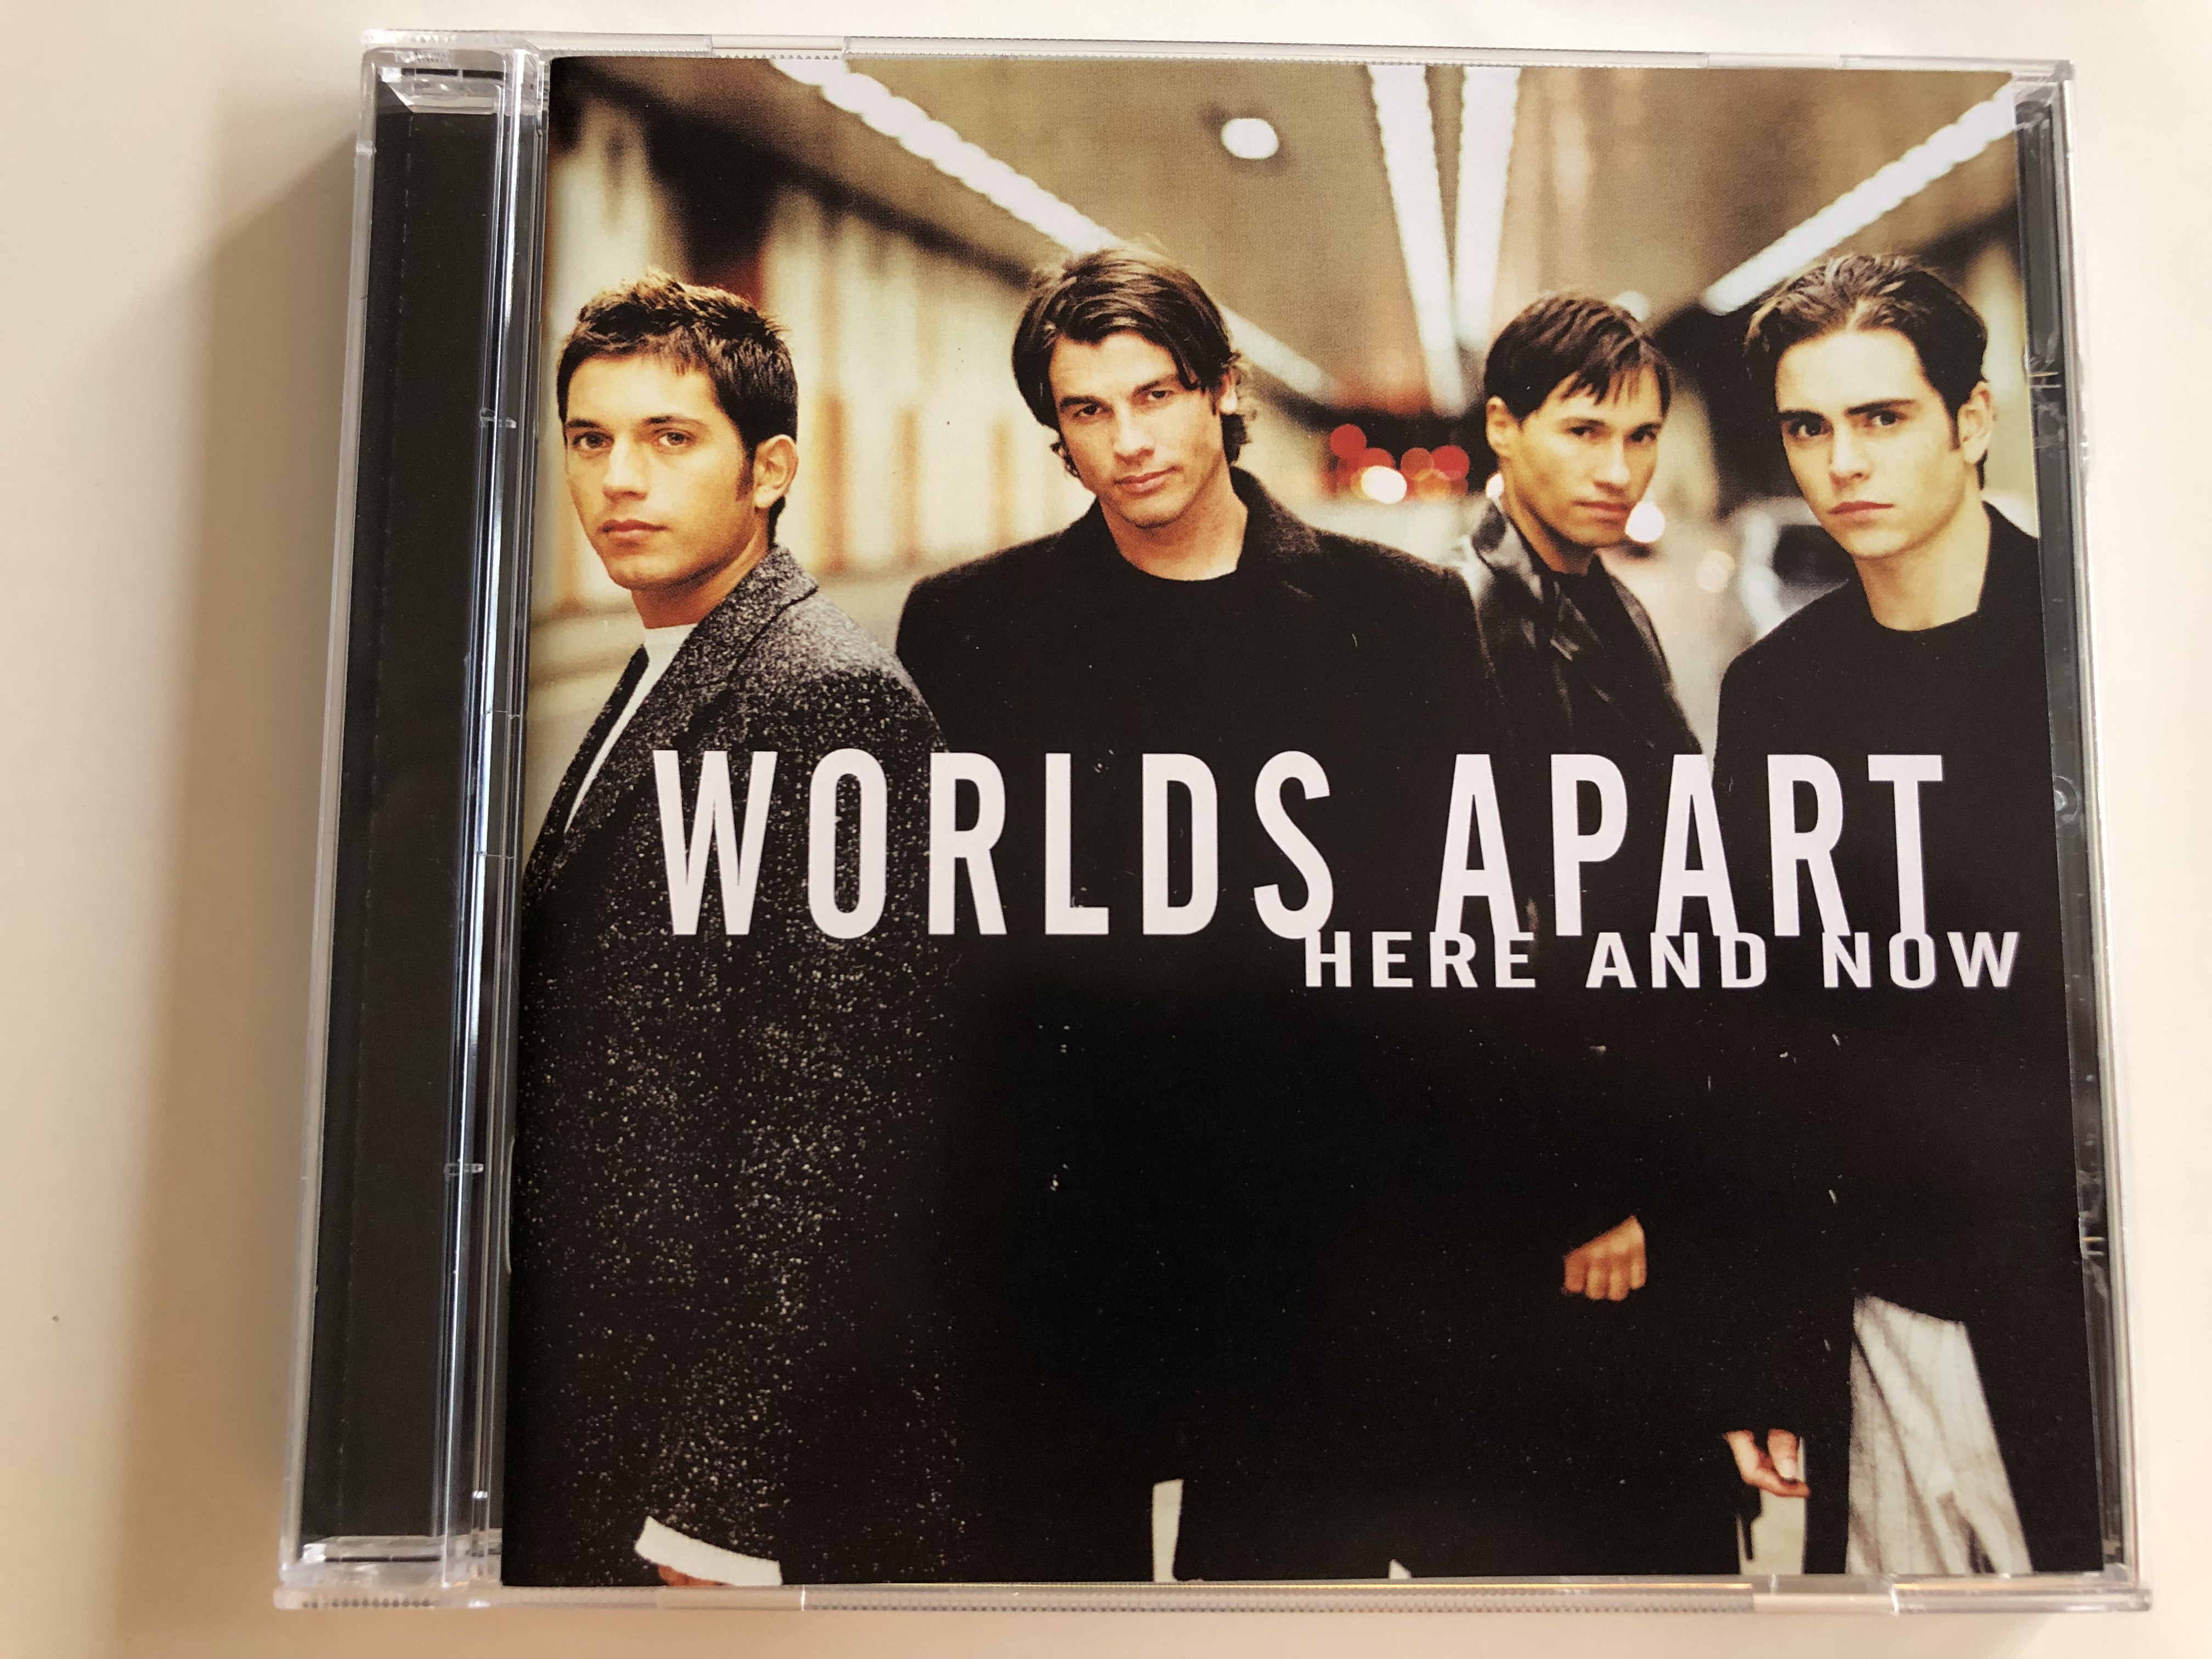 worlds-apart-here-and-now-i-will-language-of-love-i-know-fly-this-time-audio-cd-2000-emi-1-.jpg